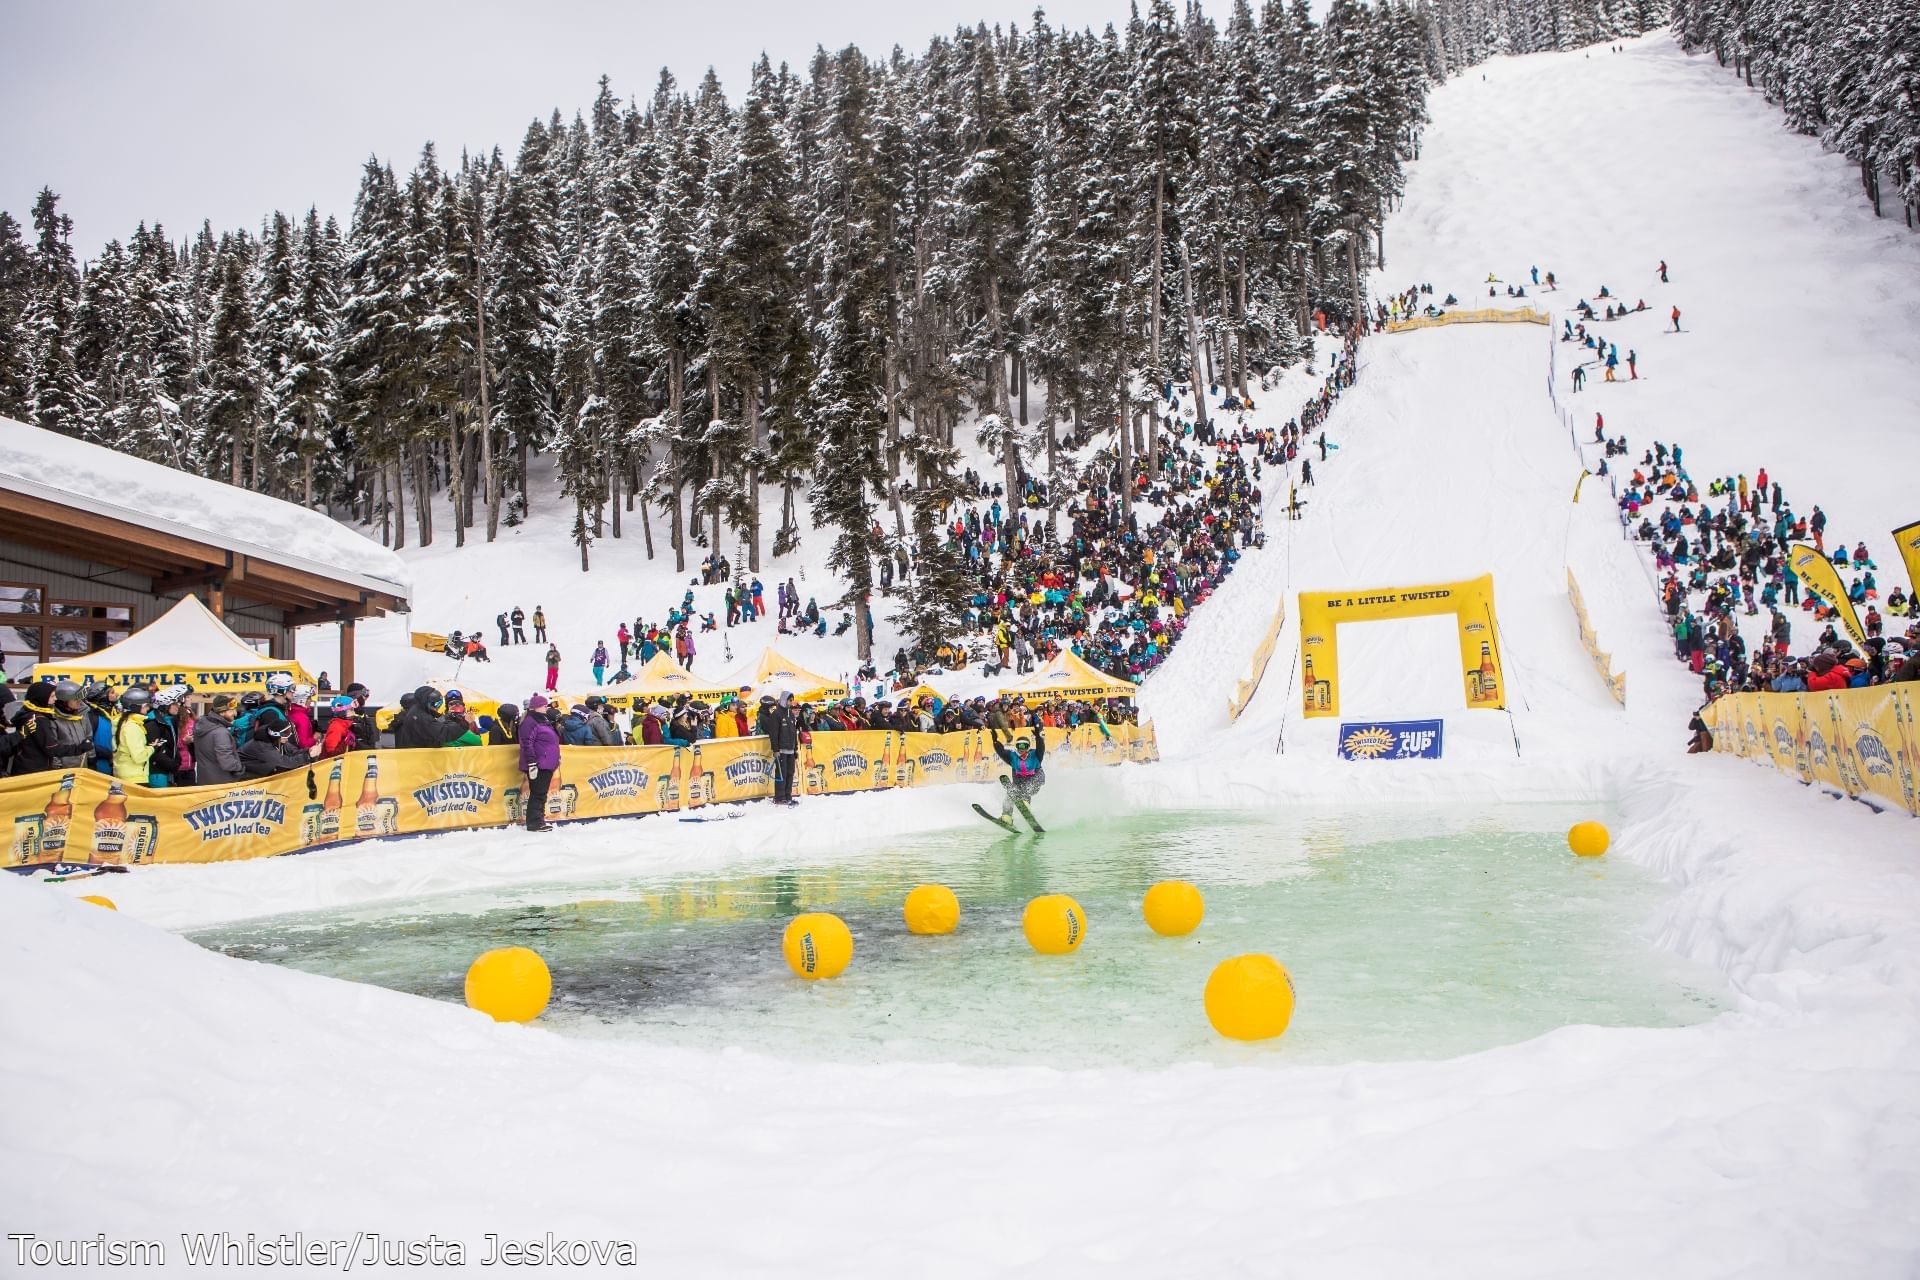 Crowded snowy pathway in Slush Cup event over an icy water pool near Blackcomb Springs Suites